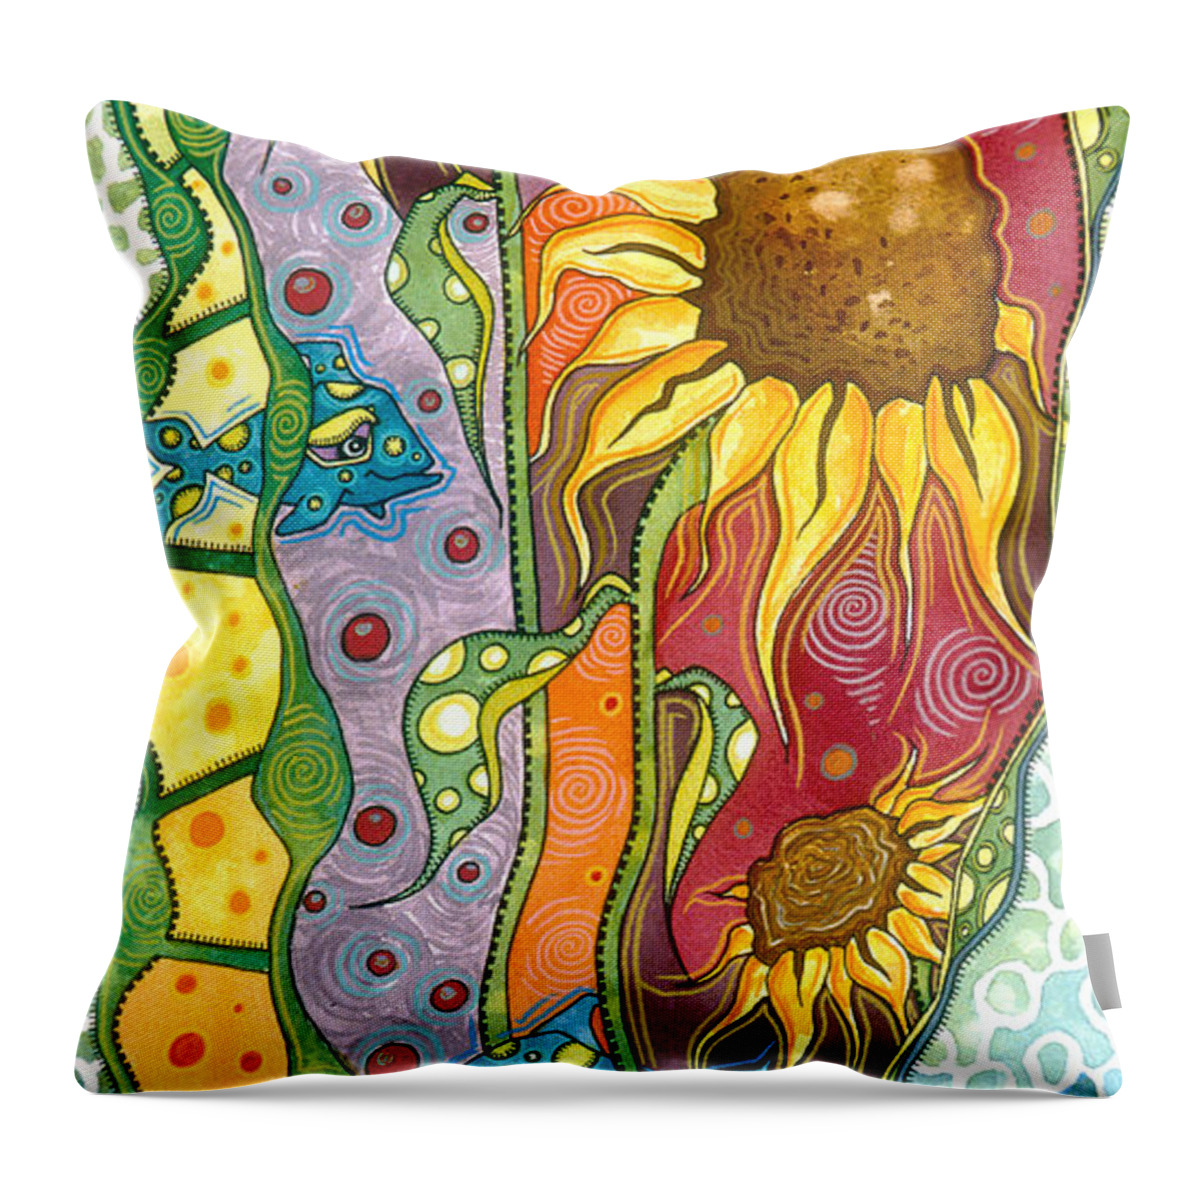 Sunflowers Throw Pillow featuring the painting Ocean Dreams by Tanielle Childers